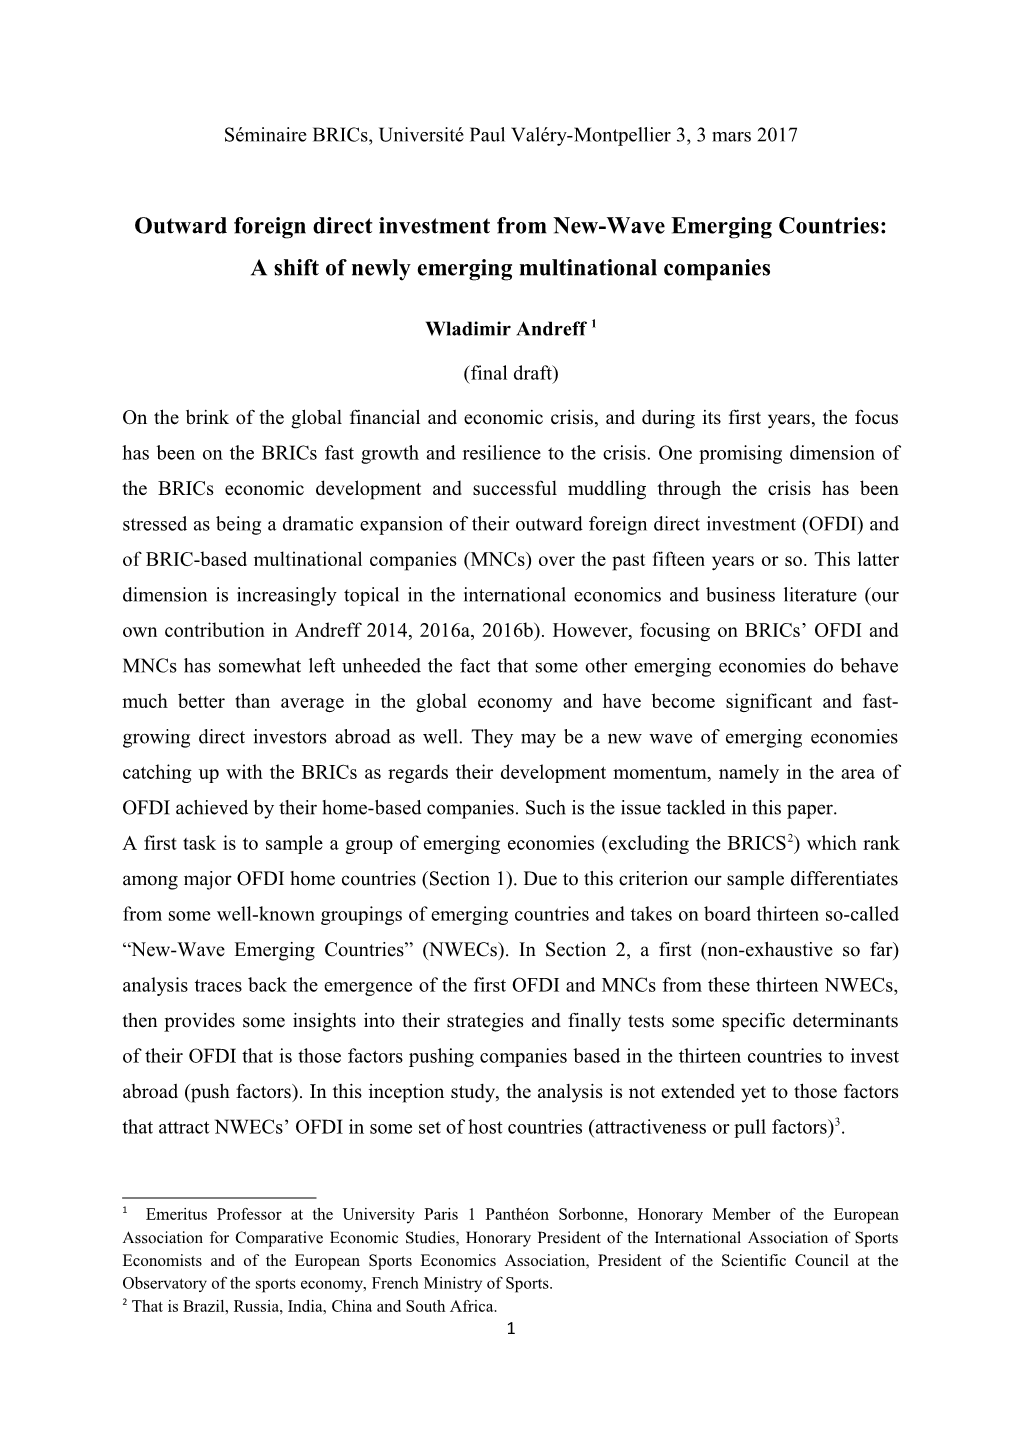 Outward Foreign Direct Investment from New-Wave Emerging Countries